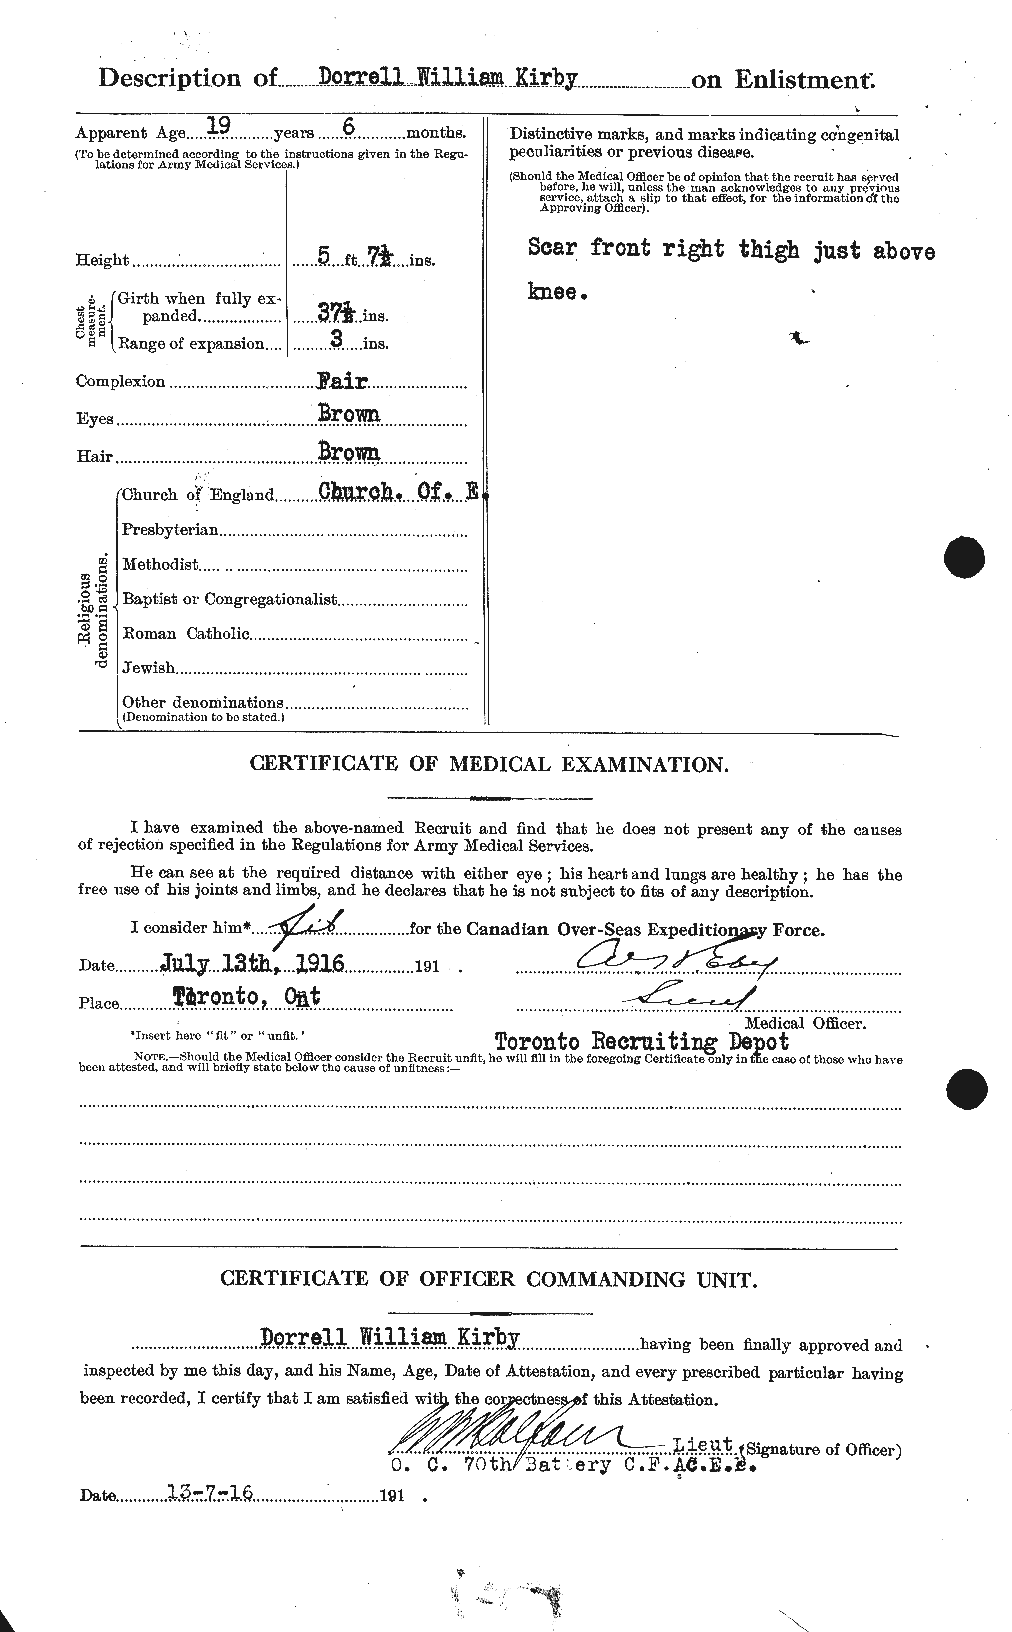 Personnel Records of the First World War - CEF 437175b